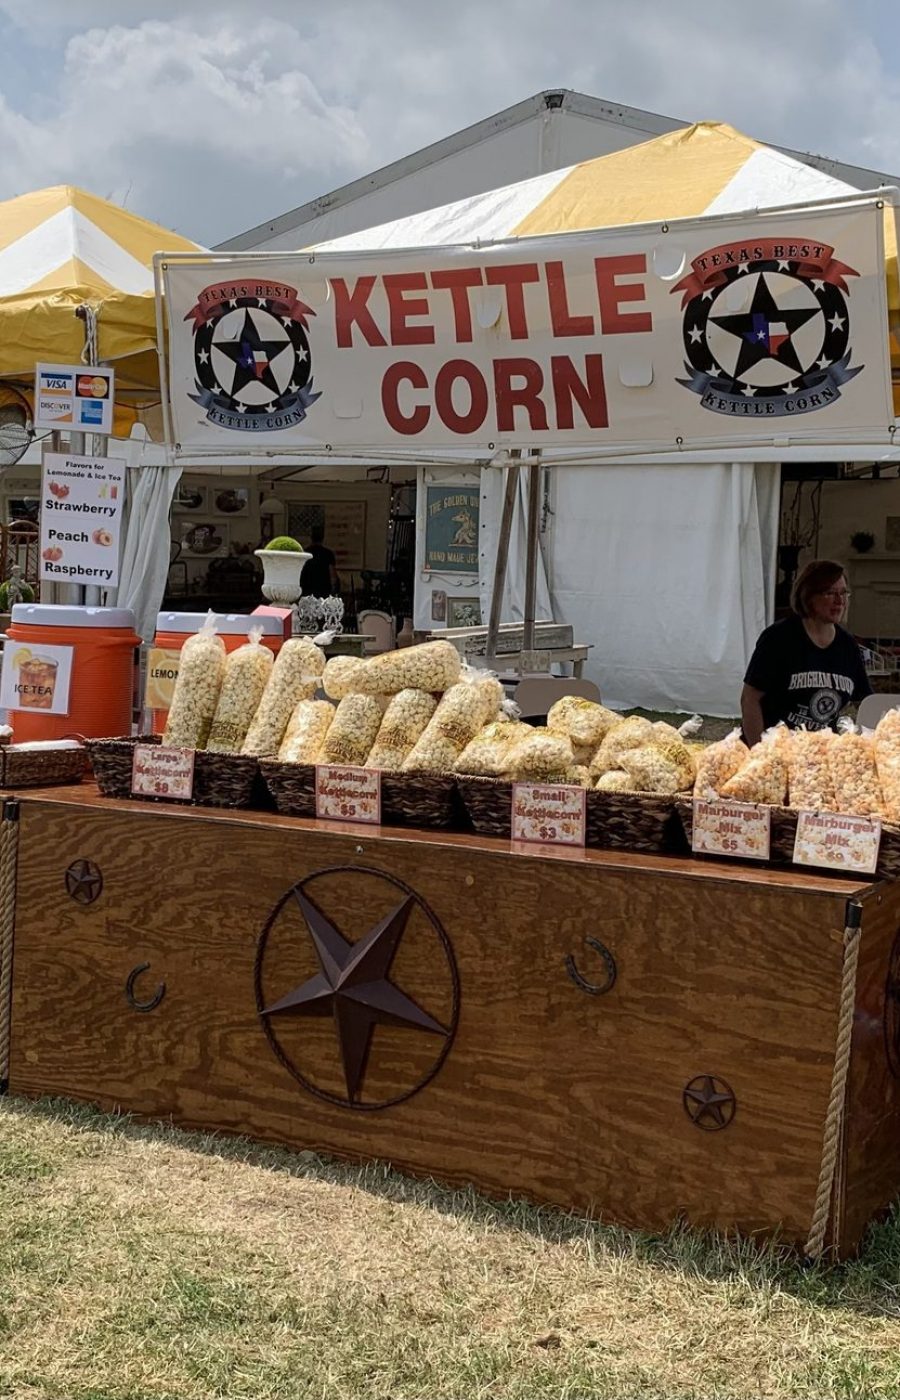 Kettle corn stand with lots of popcorn